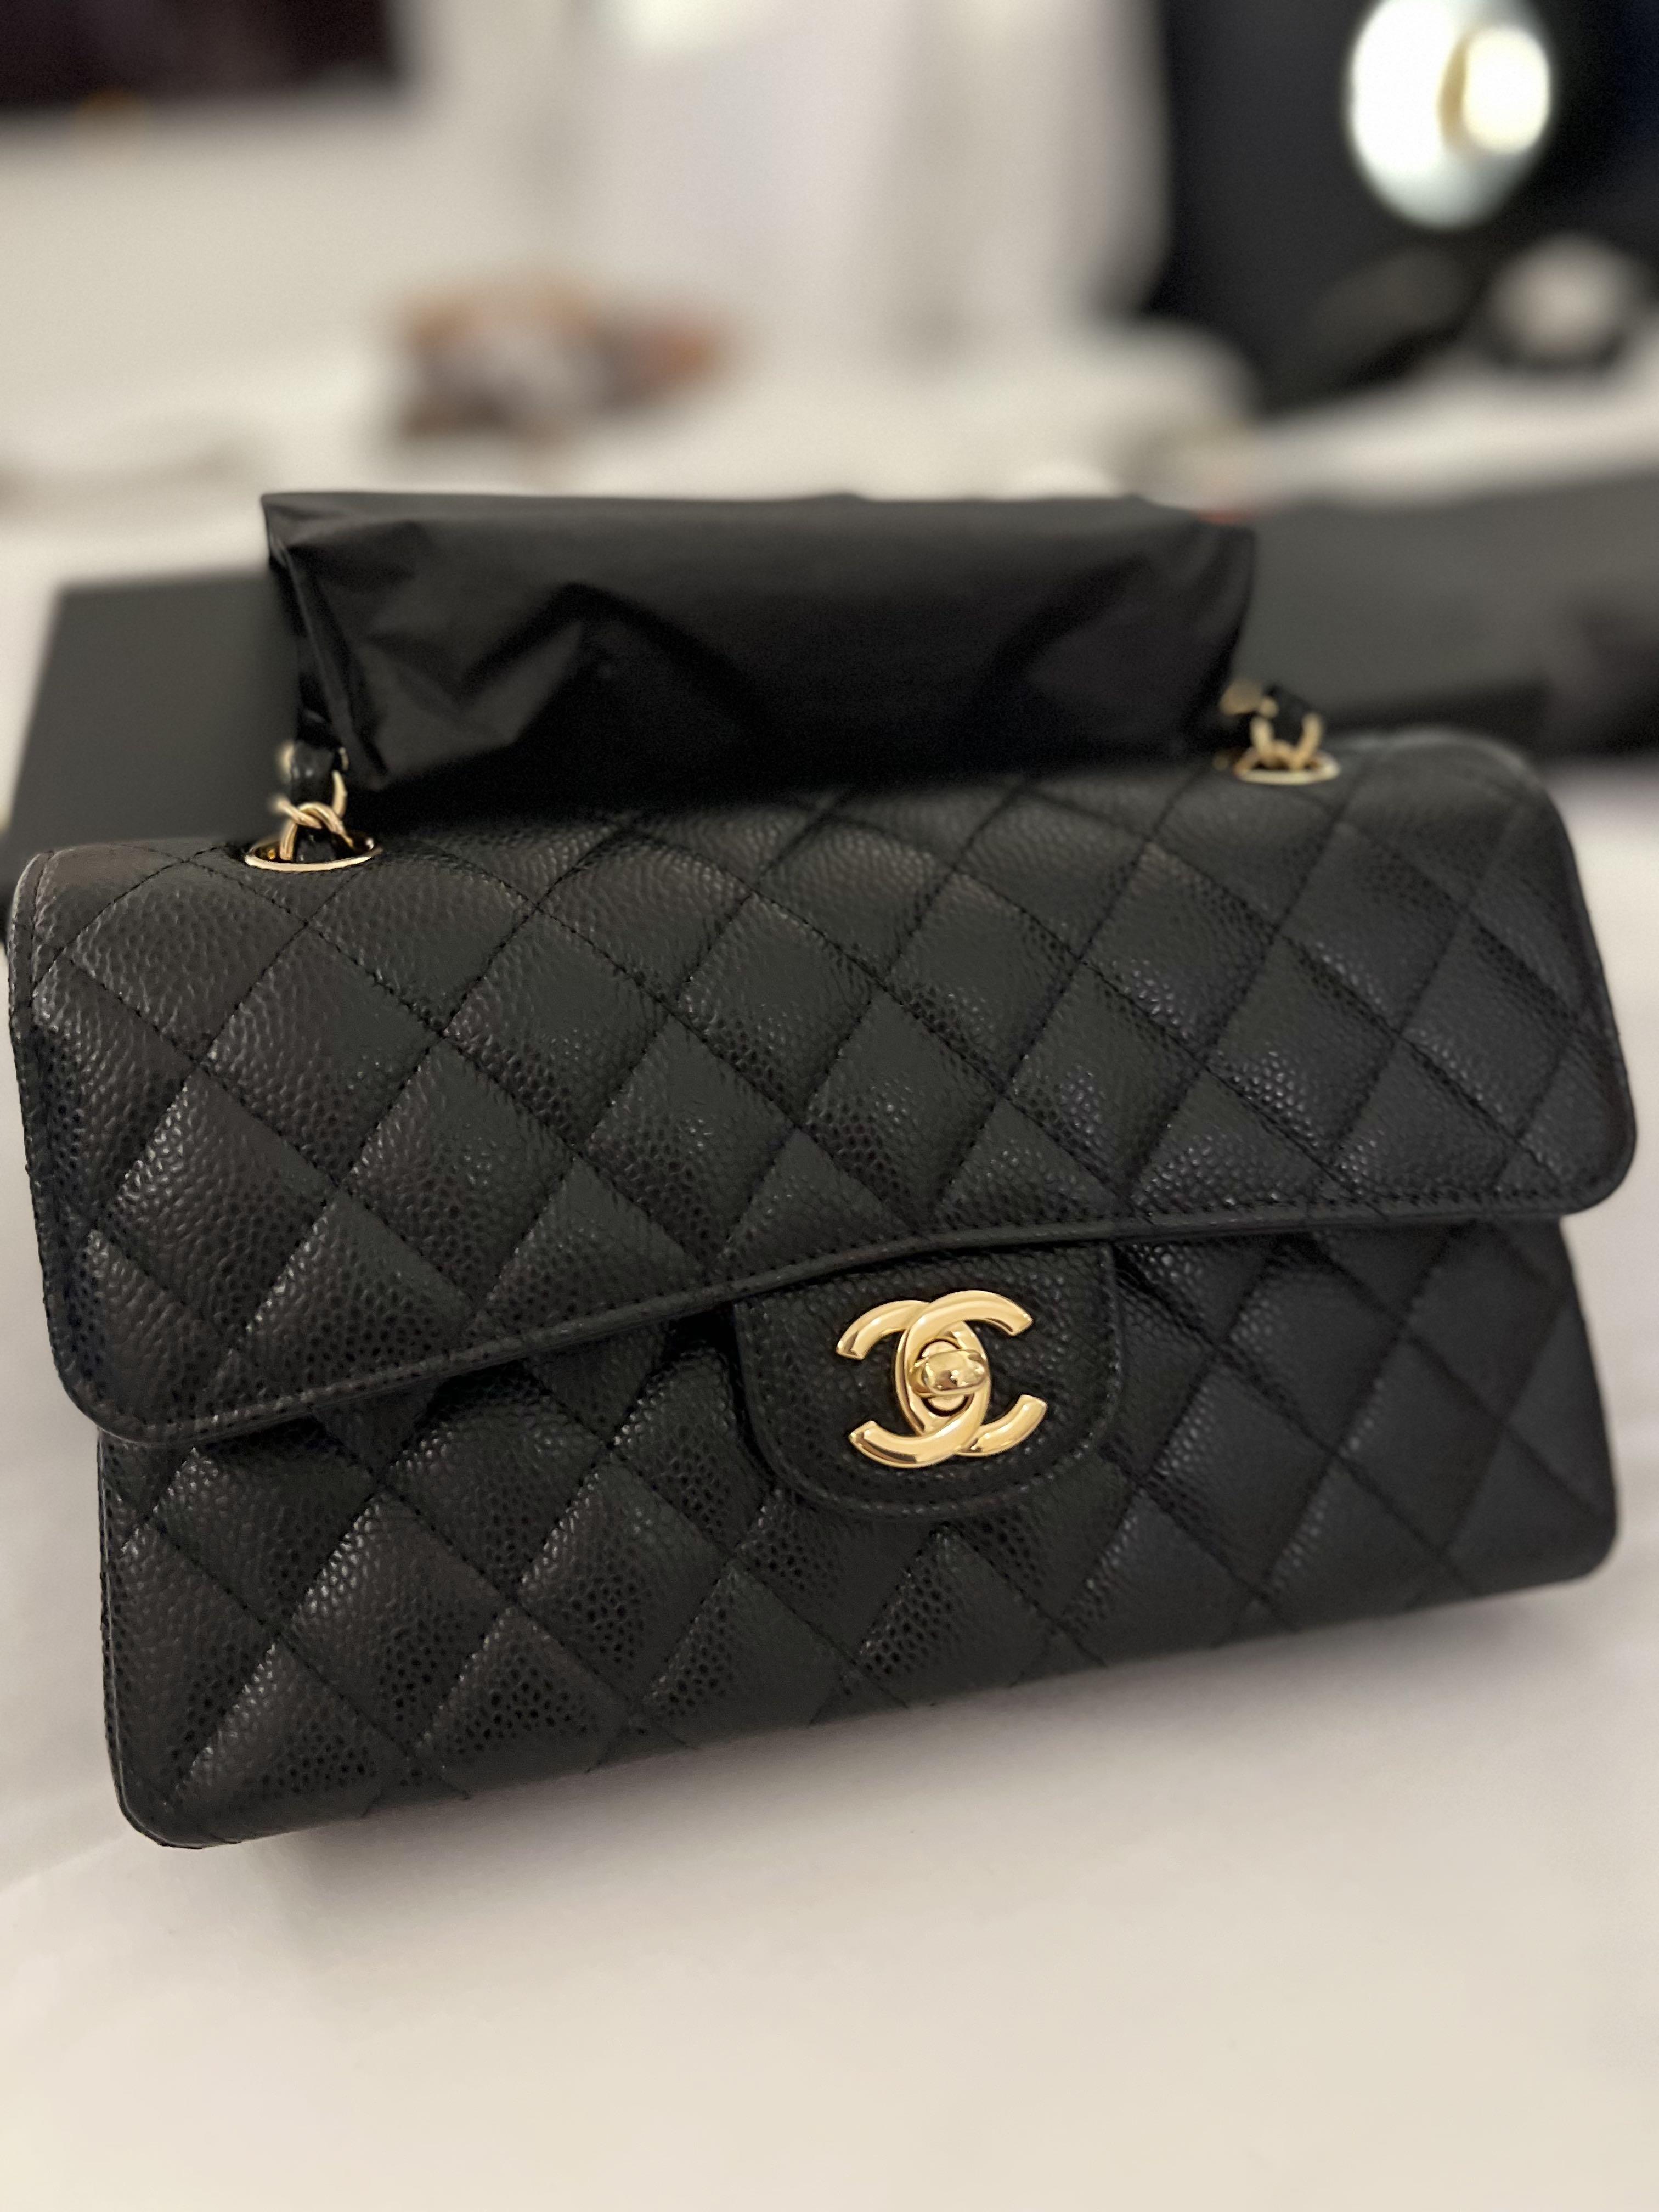 Chanel Classic Small With Gold Hardware (Caviar Leather), Luxury